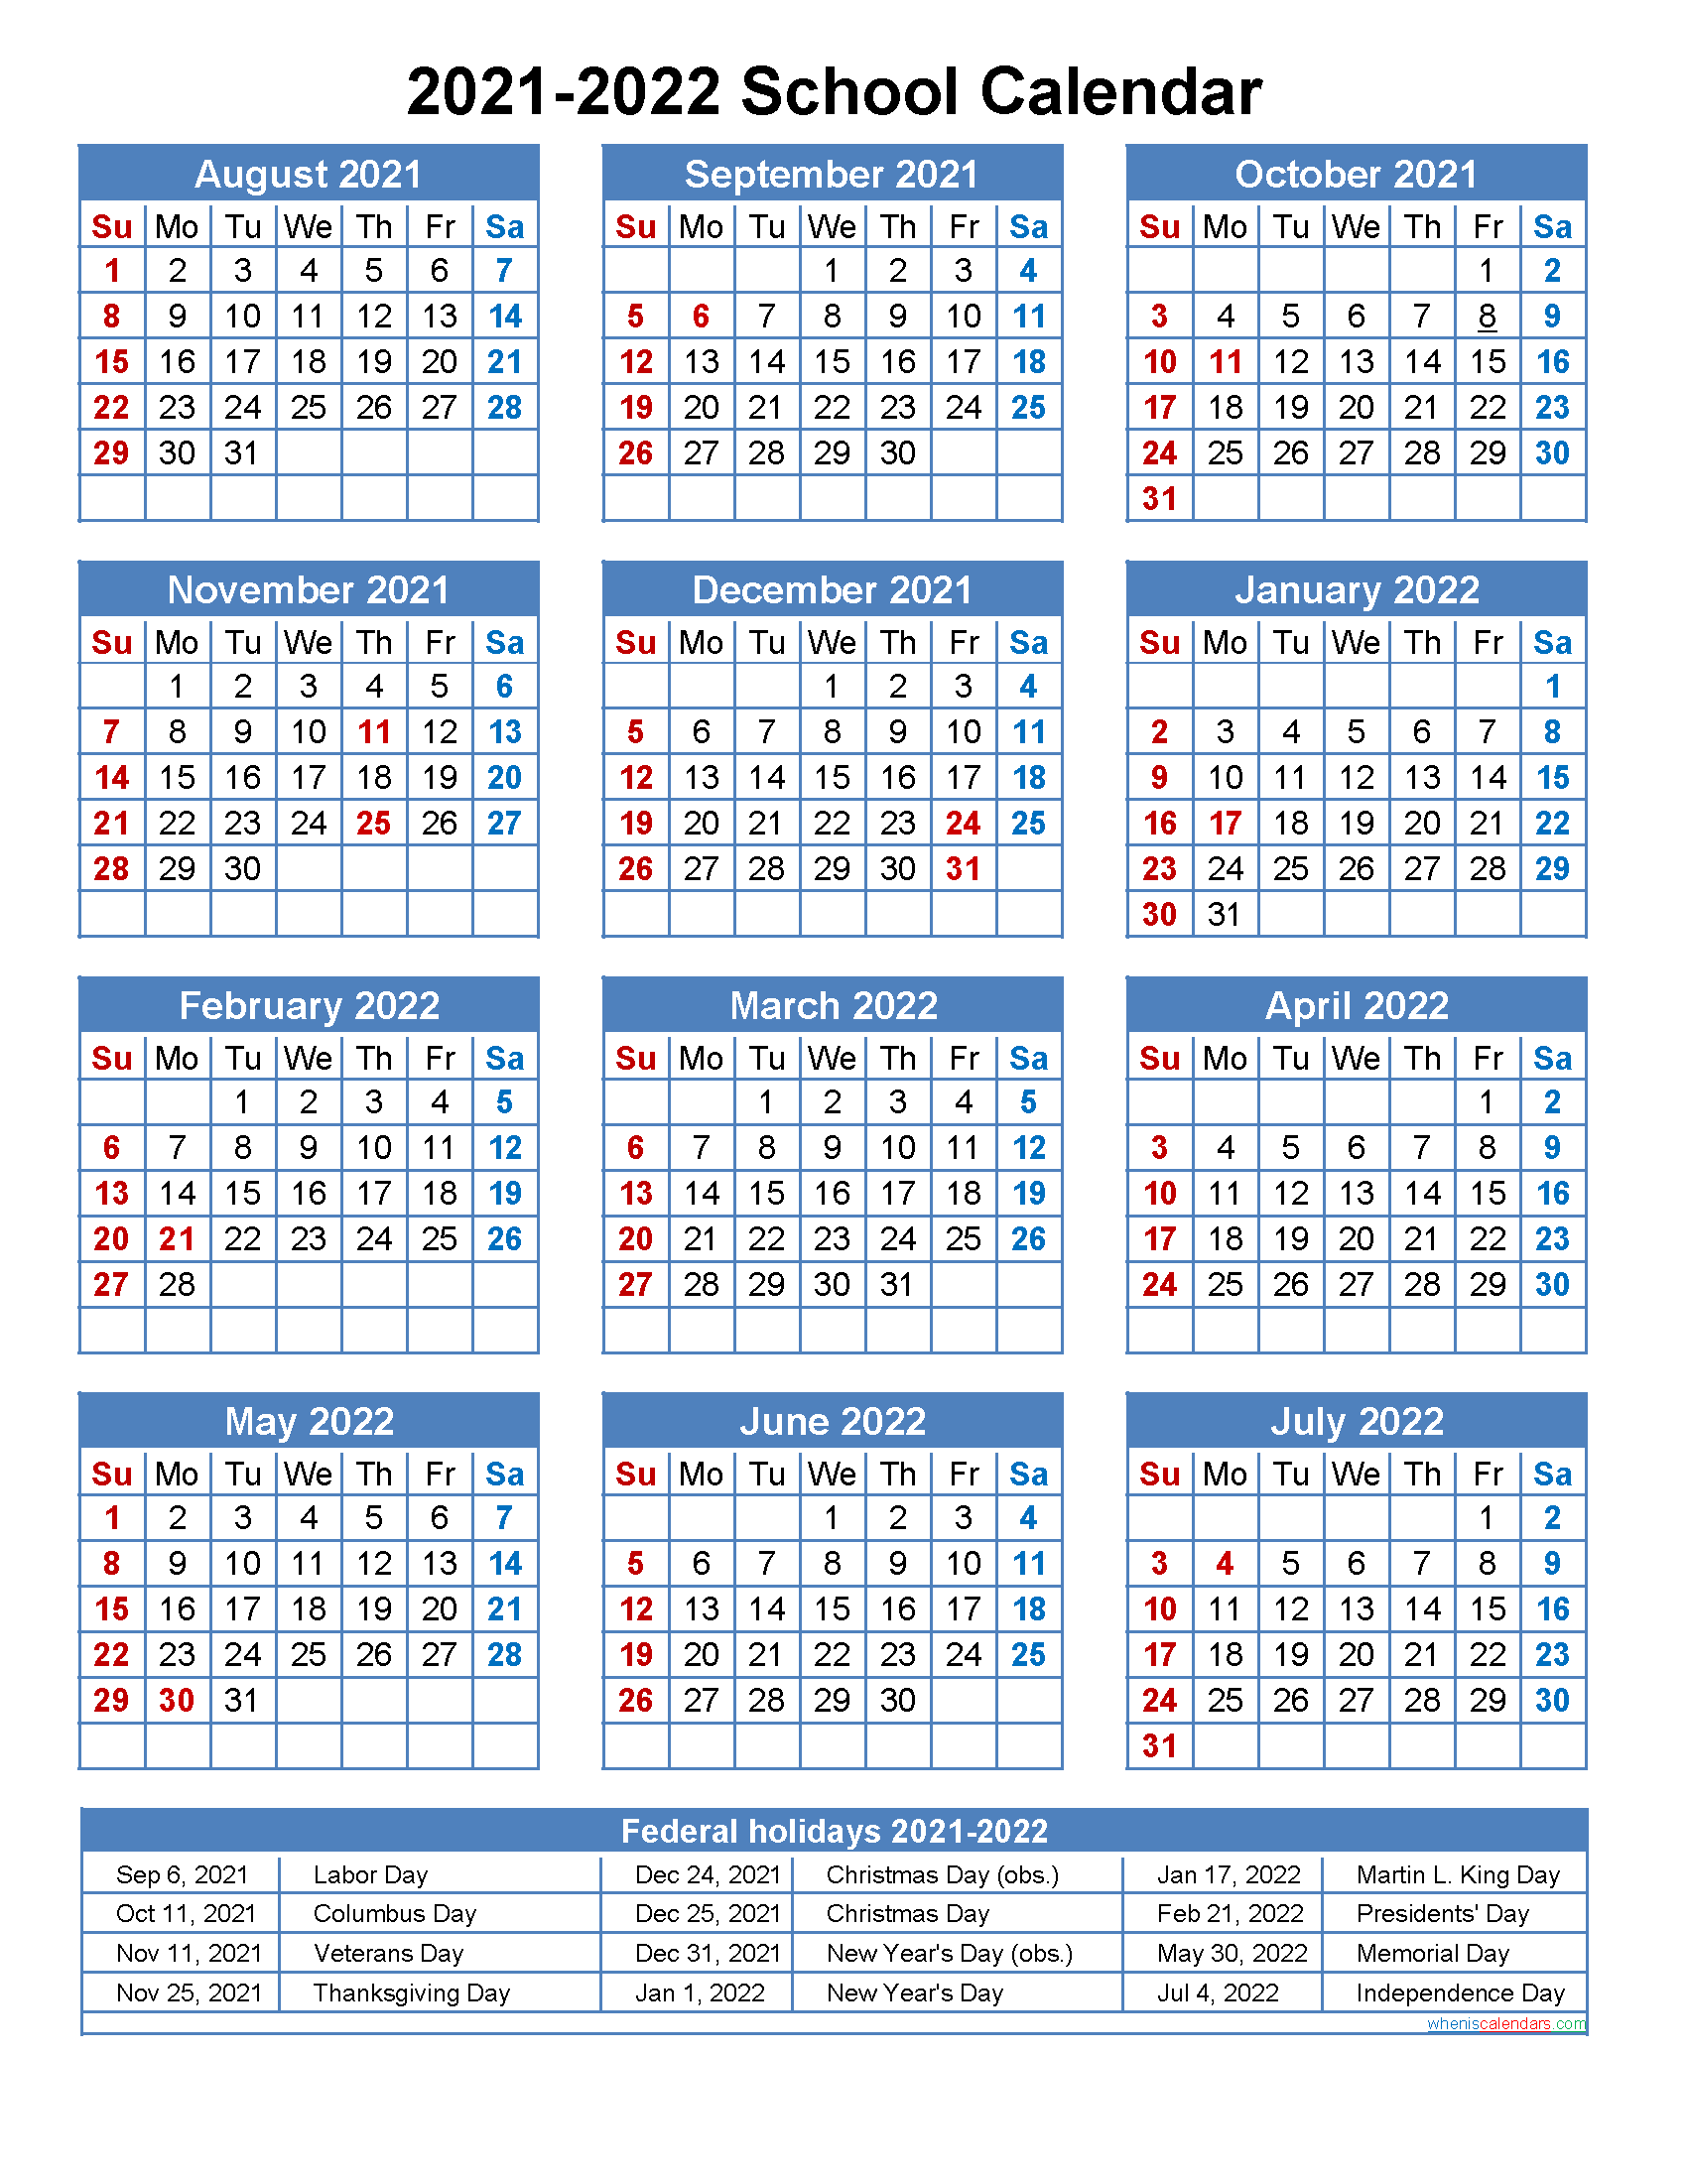 Printable Calendar August 2021 May 2022.Free School Calendar 2021 To 2022 Pdf And Image